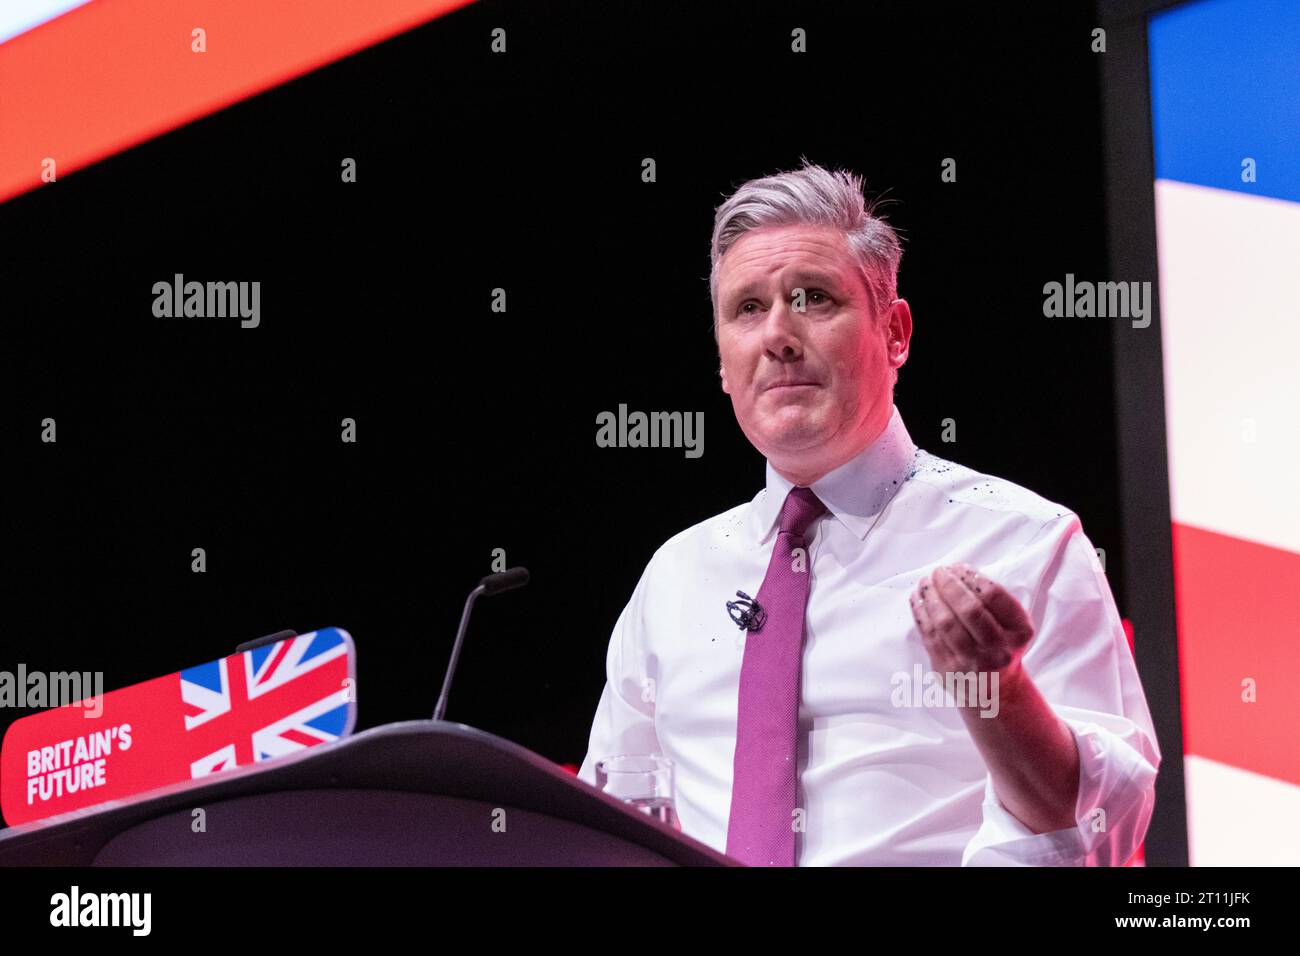 London, UK. 10 October 2023. Labour Party leader Keir Starmer speaks during the Labour Party Conference in Liverpool. Credit: GaryRobertsphotography/Alamy Live News Credit: GaryRobertsphotography/Alamy Live News Stock Photo